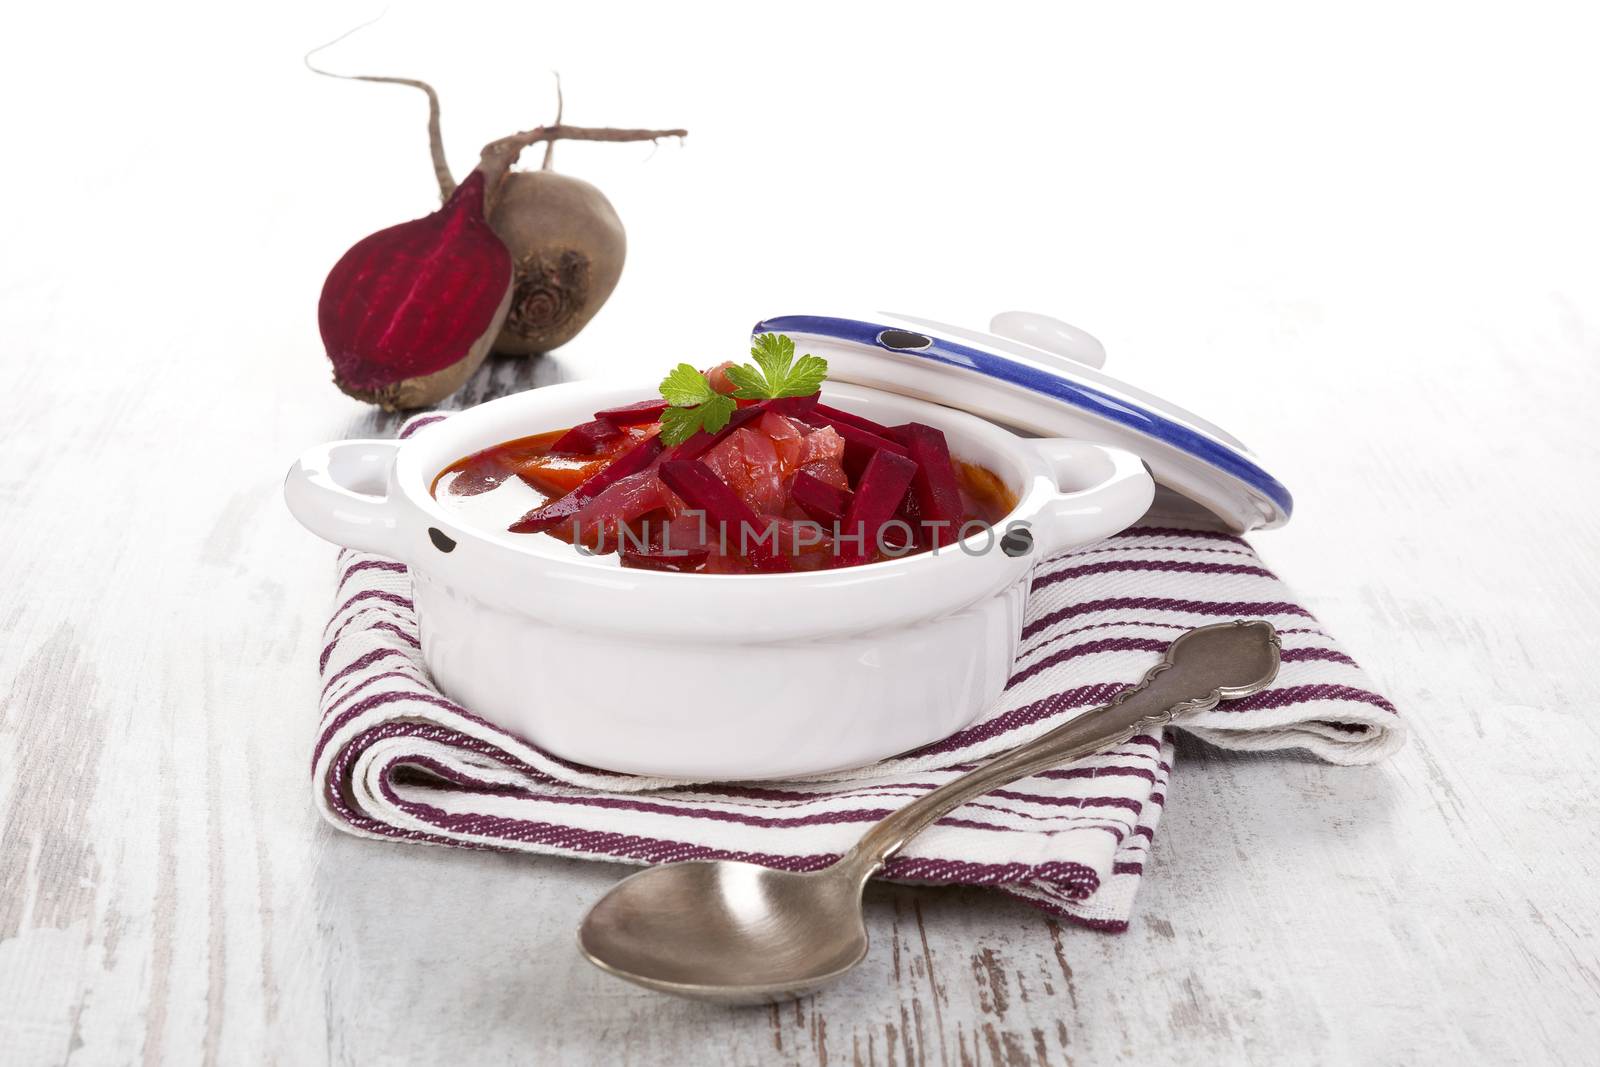 Delicious ukrainian borsch soup with fresh beetroot vegetable on purple cloth on rustic wooden table. Traditional european cuisine.